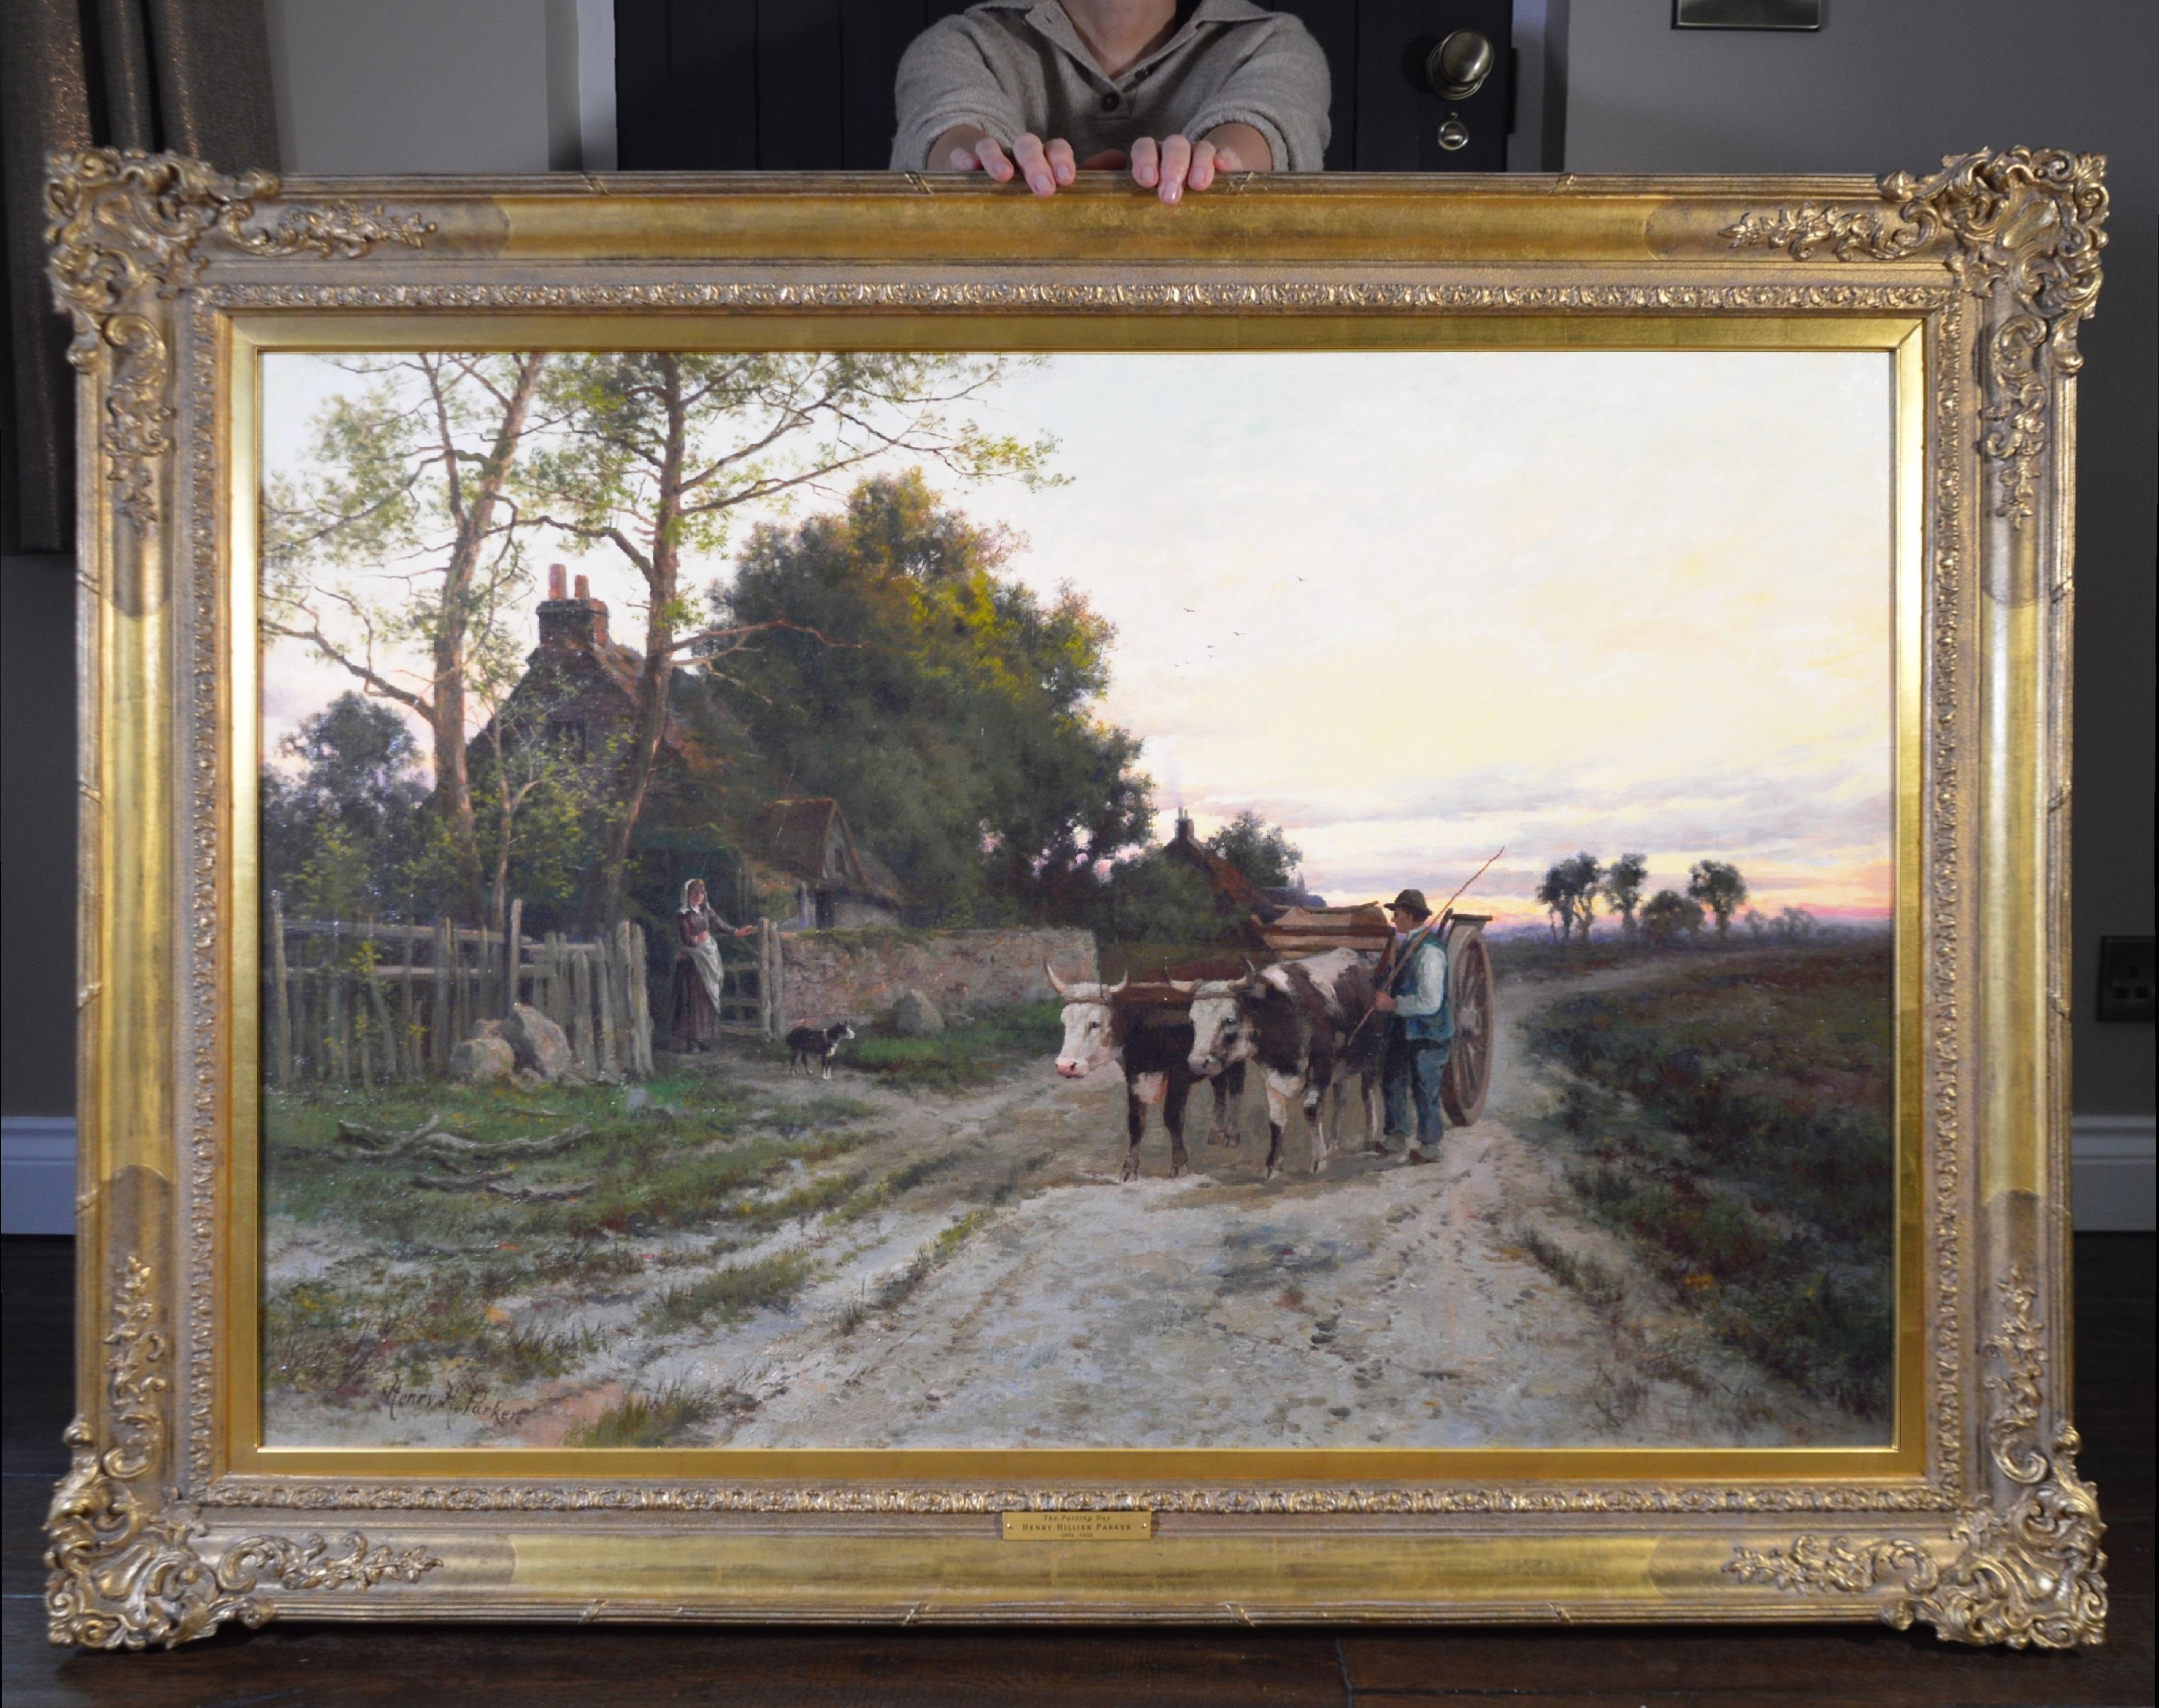 Henry H Parker Landscape Painting - The Parting Day - Large 19th Century Oil Painting English Sunset Landscape